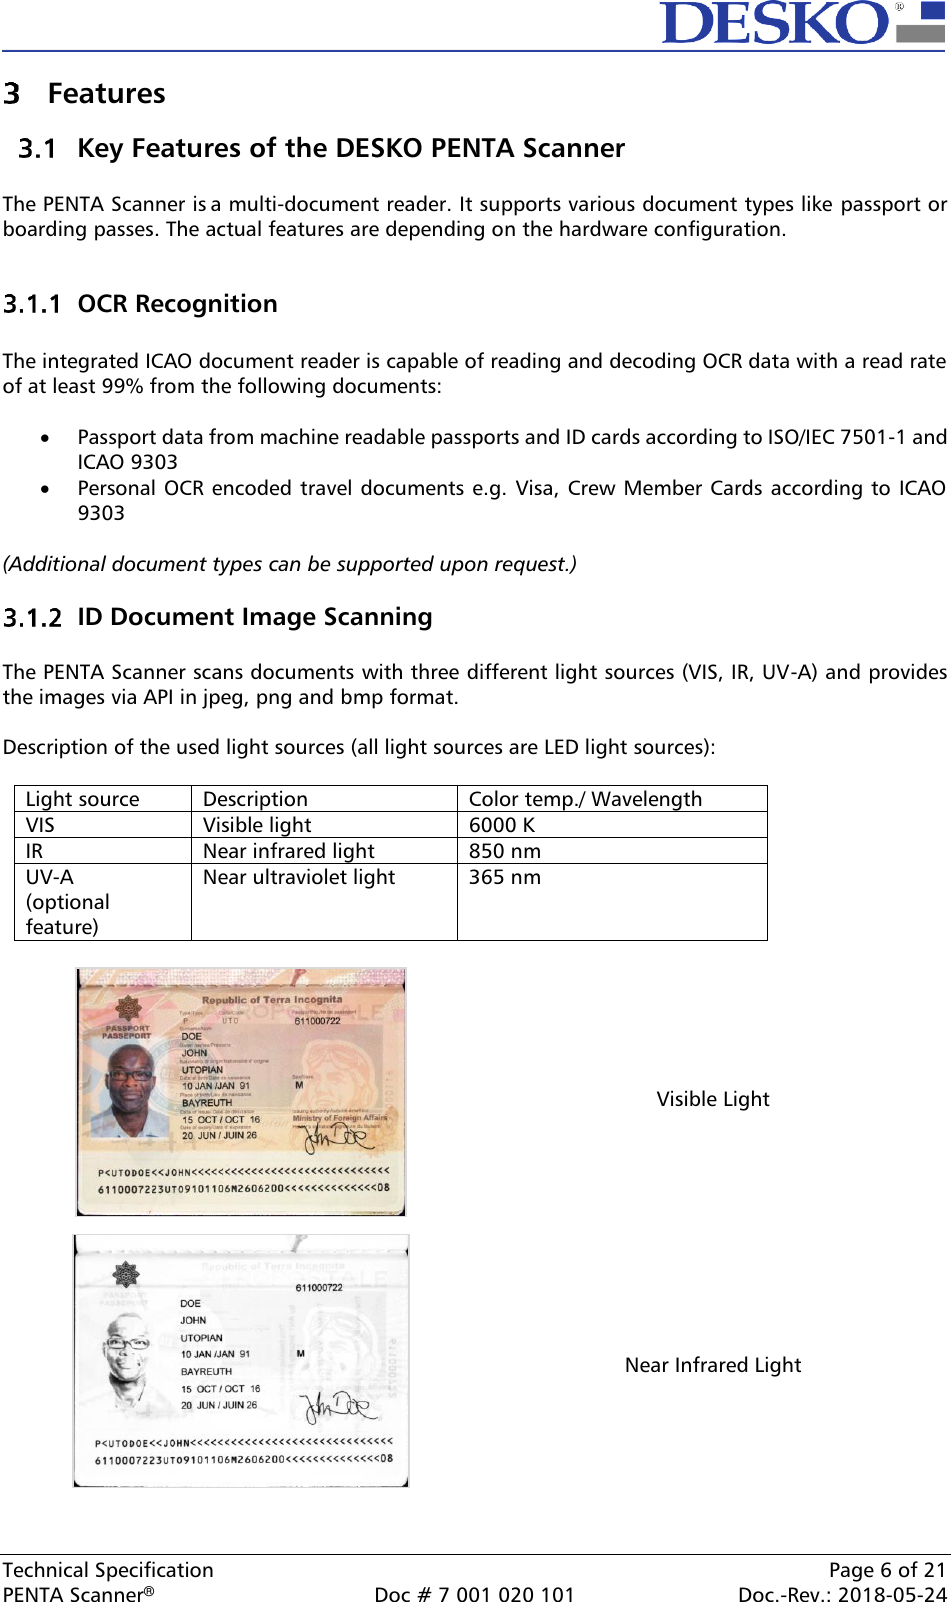  Technical Specification    Page 6 of 21 PENTA Scanner®  Doc # 7 001 020 101  Doc.-Rev.: 2018-05-24  Features  Key Features of the DESKO PENTA Scanner  The PENTA Scanner is a multi-document reader. It supports various document types like passport or boarding passes. The actual features are depending on the hardware configuration.   OCR Recognition  The integrated ICAO document reader is capable of reading and decoding OCR data with a read rate of at least 99% from the following documents:  • Passport data from machine readable passports and ID cards according to ISO/IEC 7501-1 and ICAO 9303 • Personal OCR encoded travel documents e.g. Visa, Crew Member Cards according to  ICAO 9303  (Additional document types can be supported upon request.)   ID Document Image Scanning  The PENTA Scanner scans documents with three different light sources (VIS, IR, UV-A) and provides the images via API in jpeg, png and bmp format.  Description of the used light sources (all light sources are LED light sources):  Light source Description Color temp./ Wavelength VIS Visible light 6000 K IR Near infrared light 850 nm UV-A  (optional feature) Near ultraviolet light 365 nm   Visible Light  Near Infrared Light 